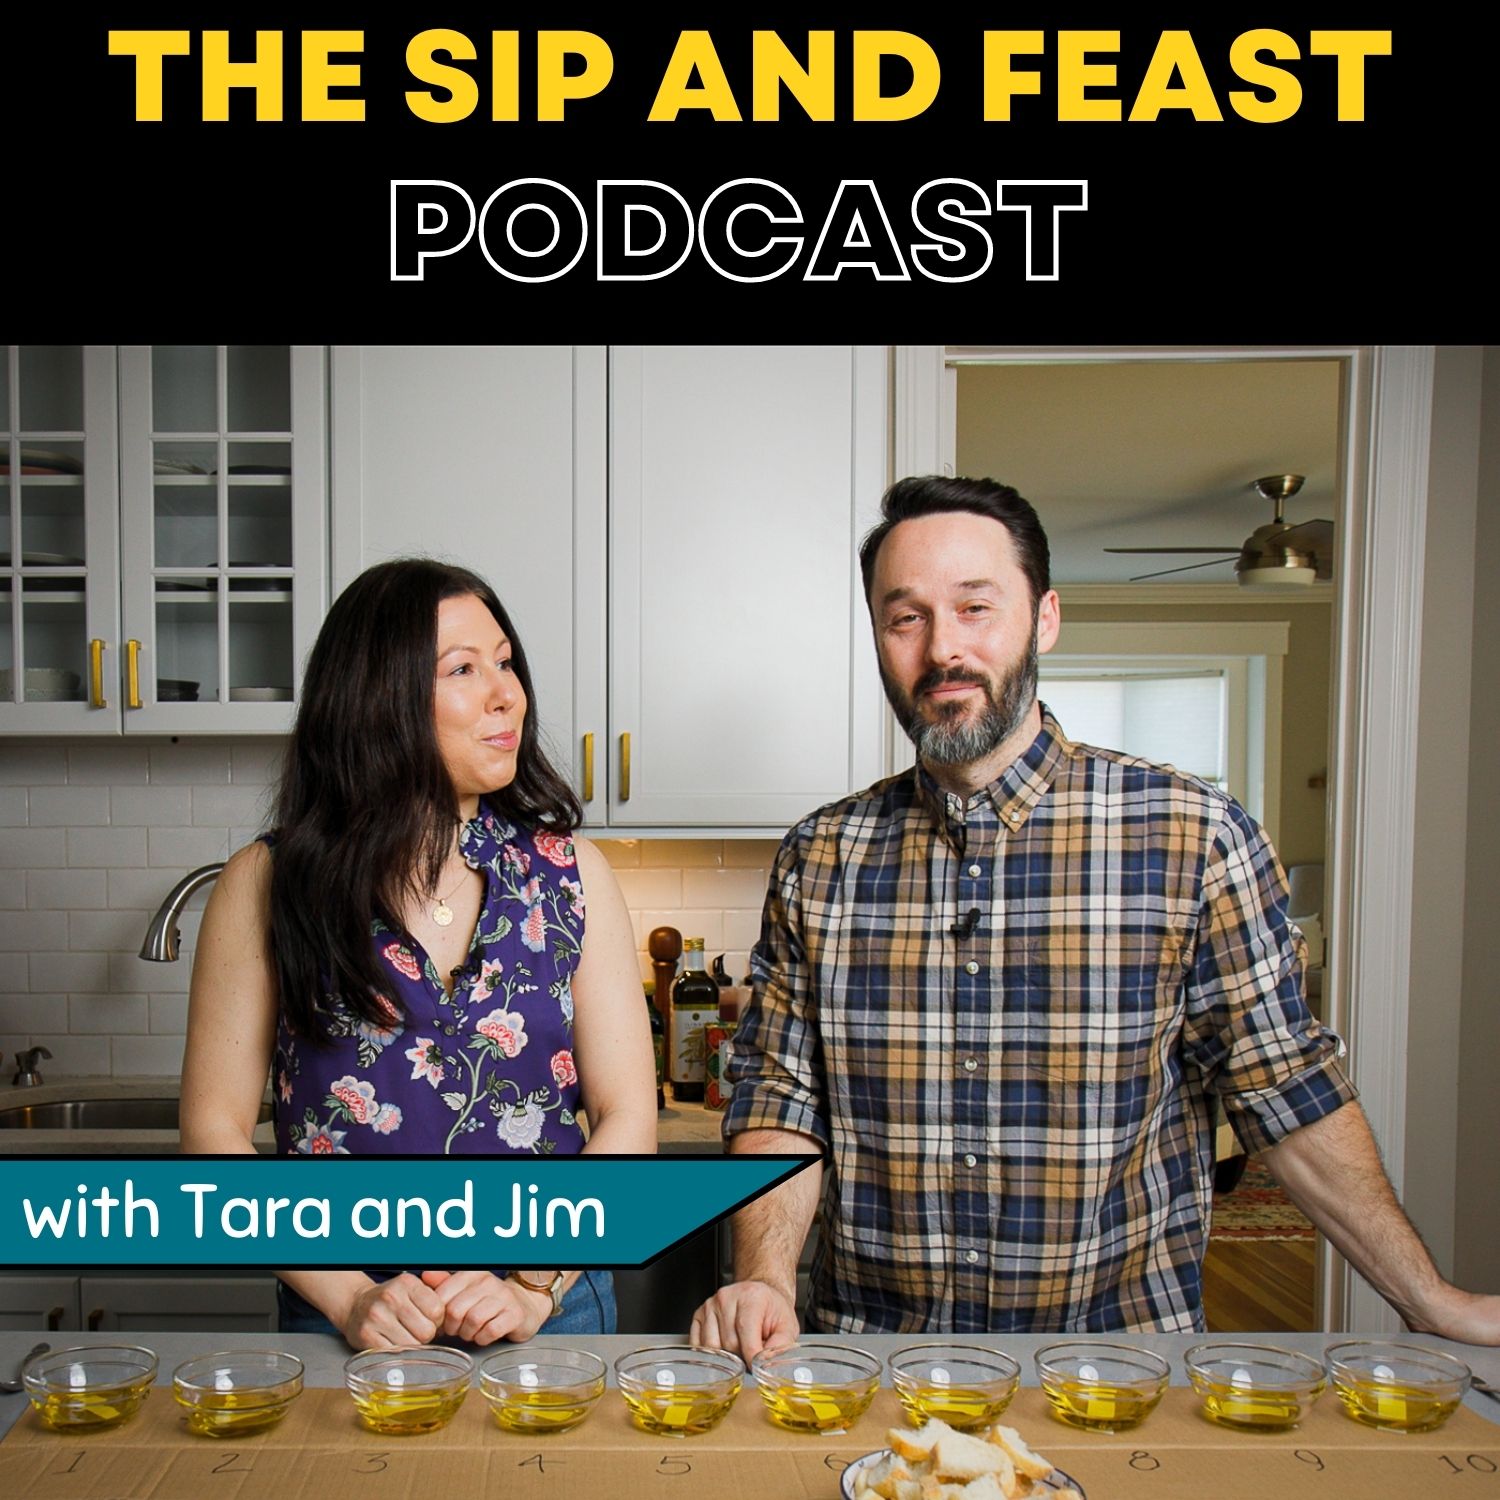 The Sip and Feast Podcast cover art.